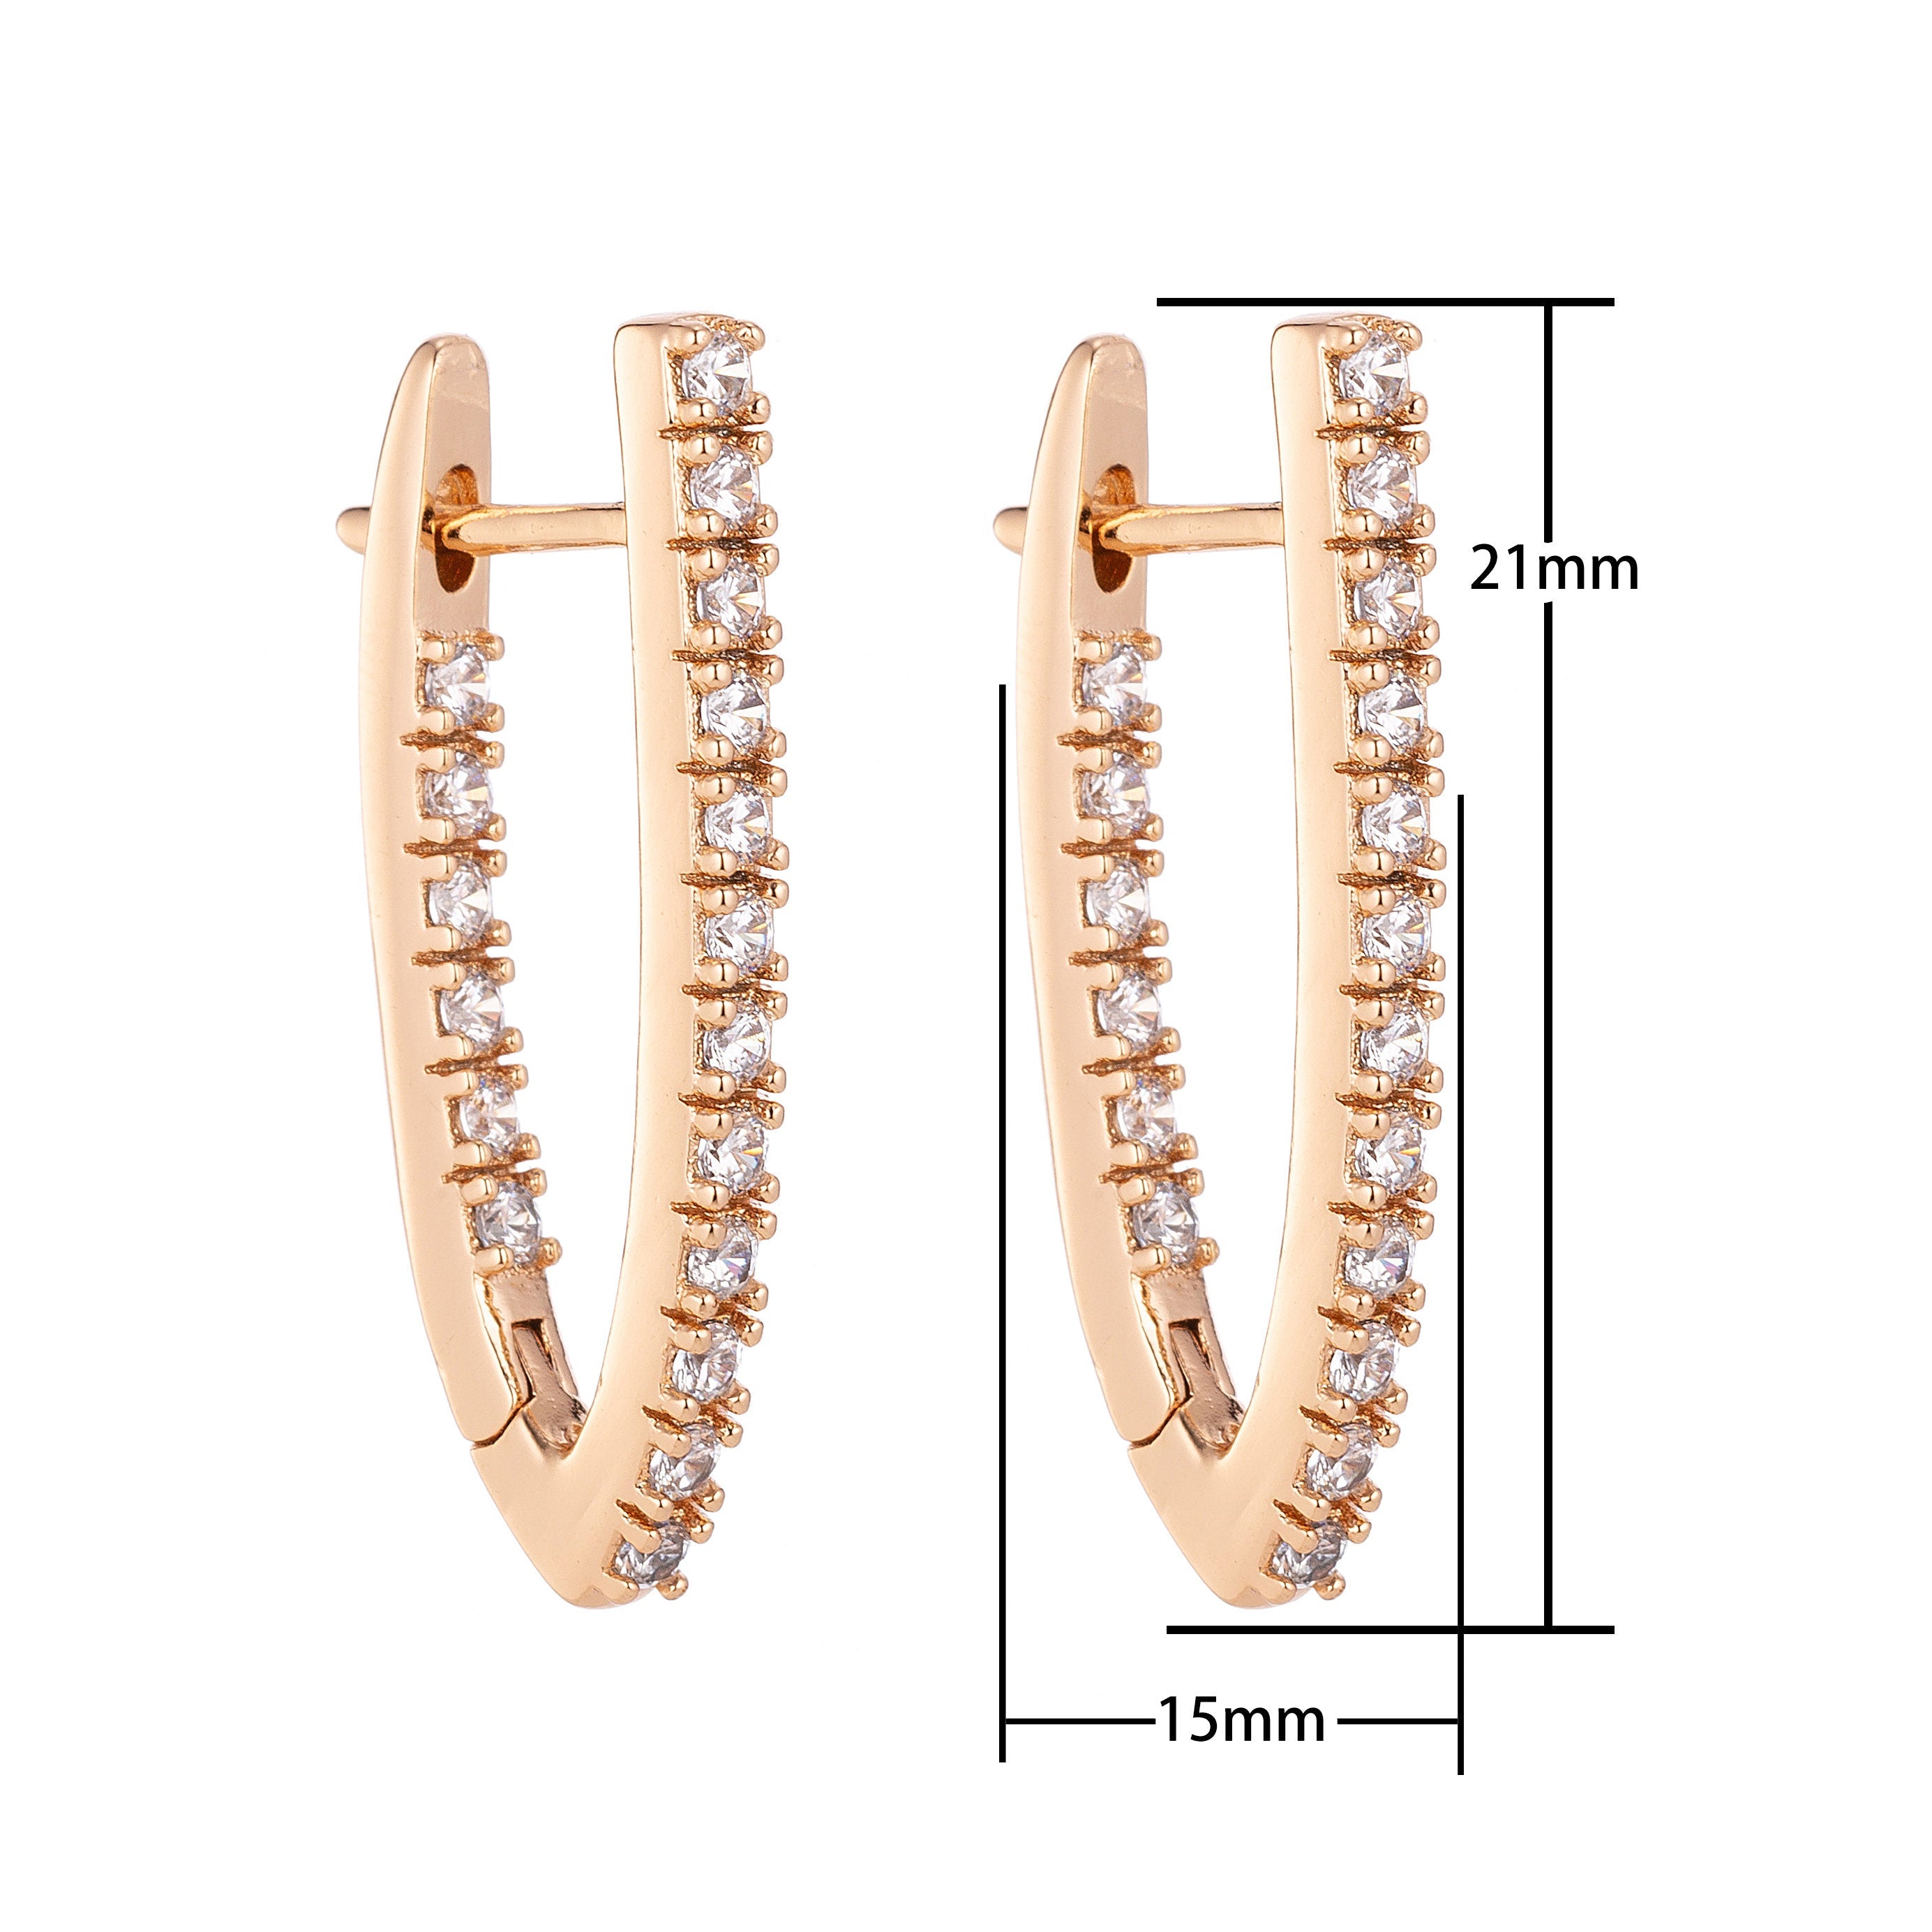 Gold Curved Latch Back Earring, Gold Earrings, Gold Plated, Cubic Zirconia, Stylish Earrings, Simple Earrings, Cuff Earrings, Earring-292 - DLUXCA